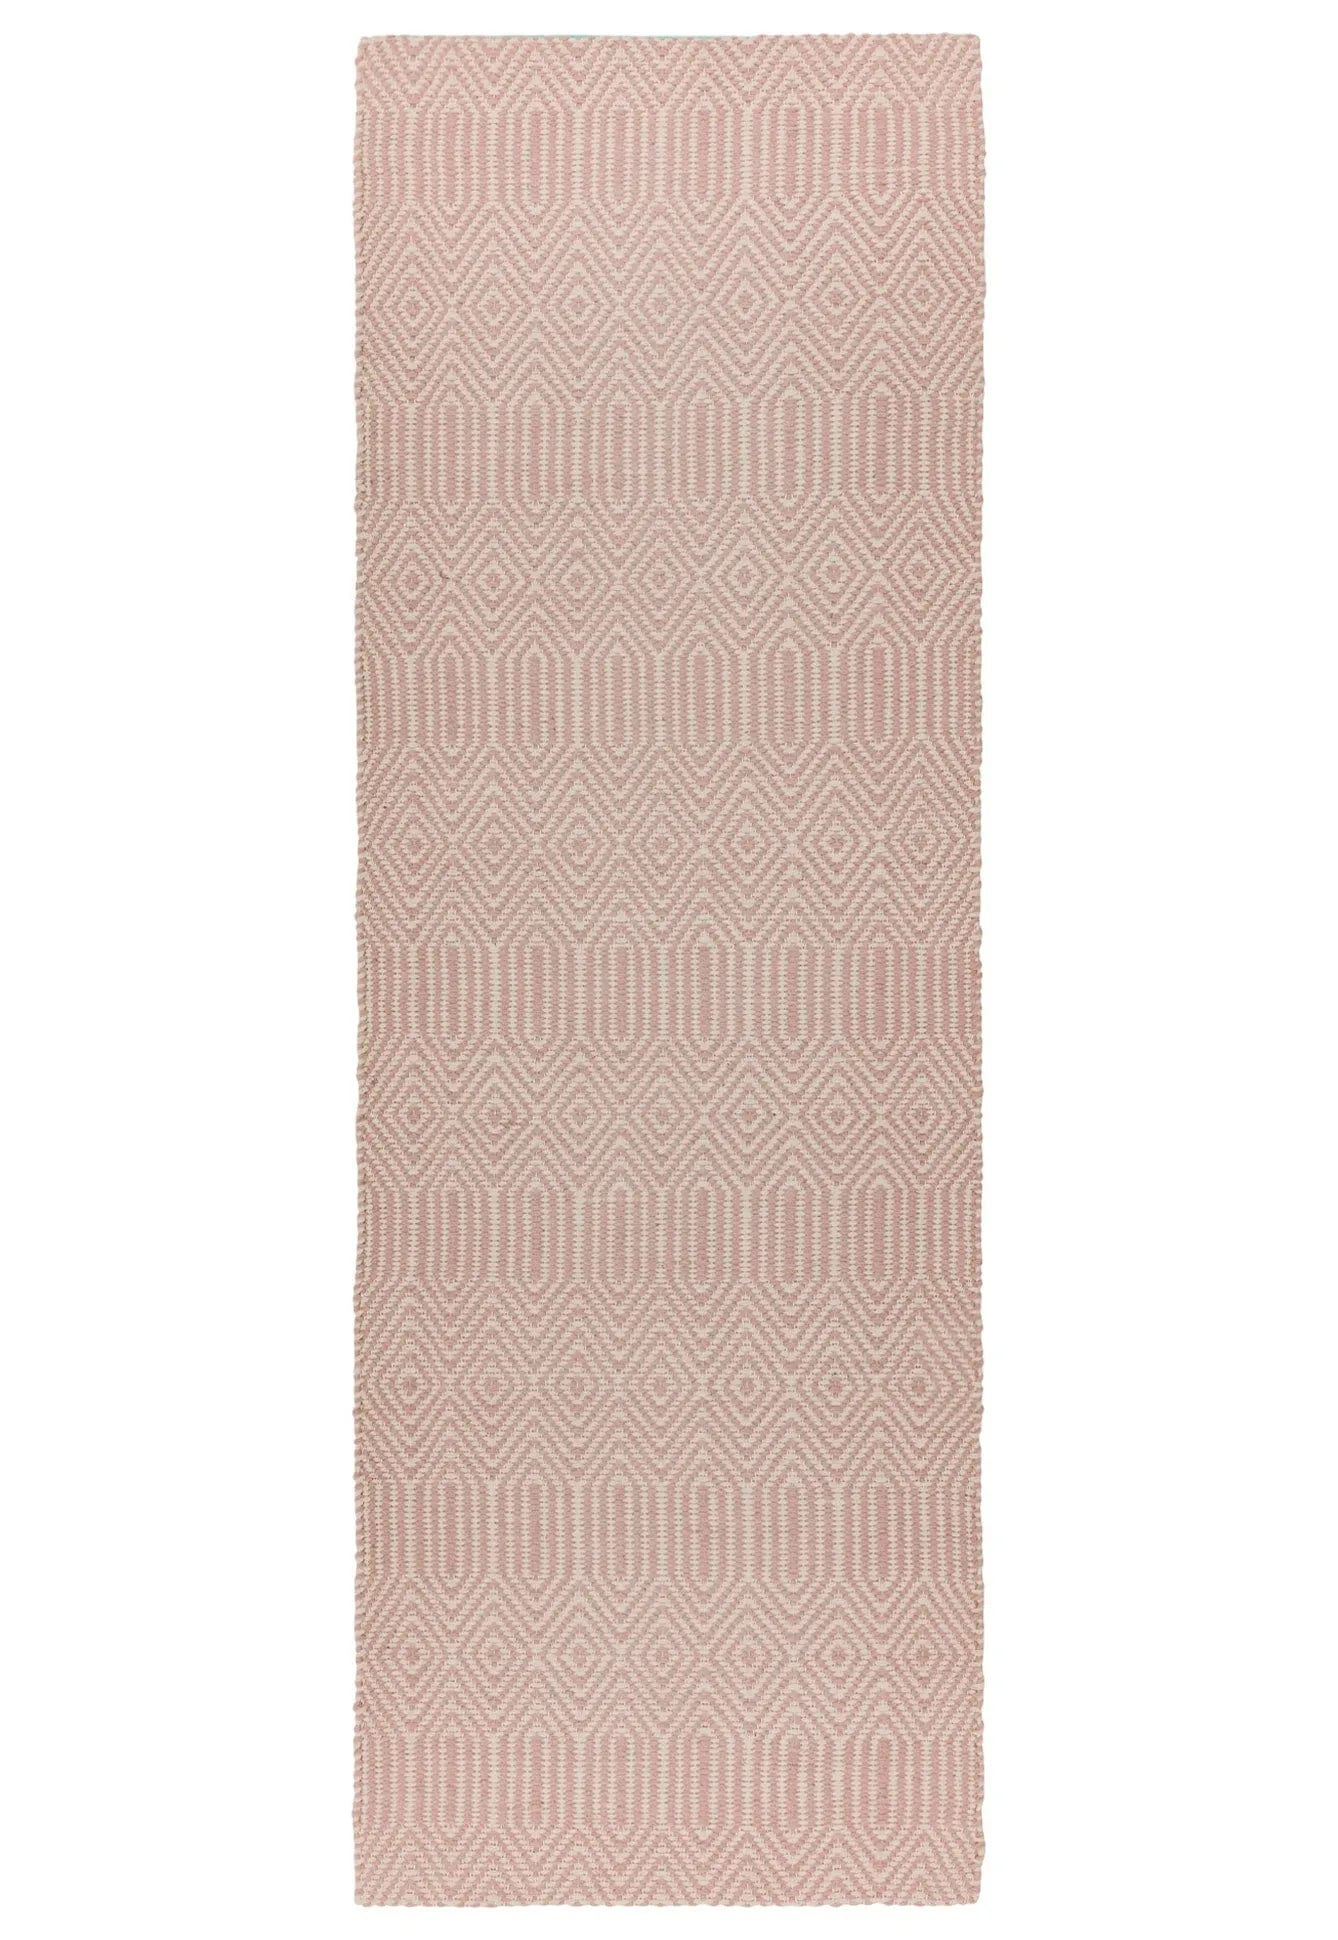 pink and white runner with an aztec pattern